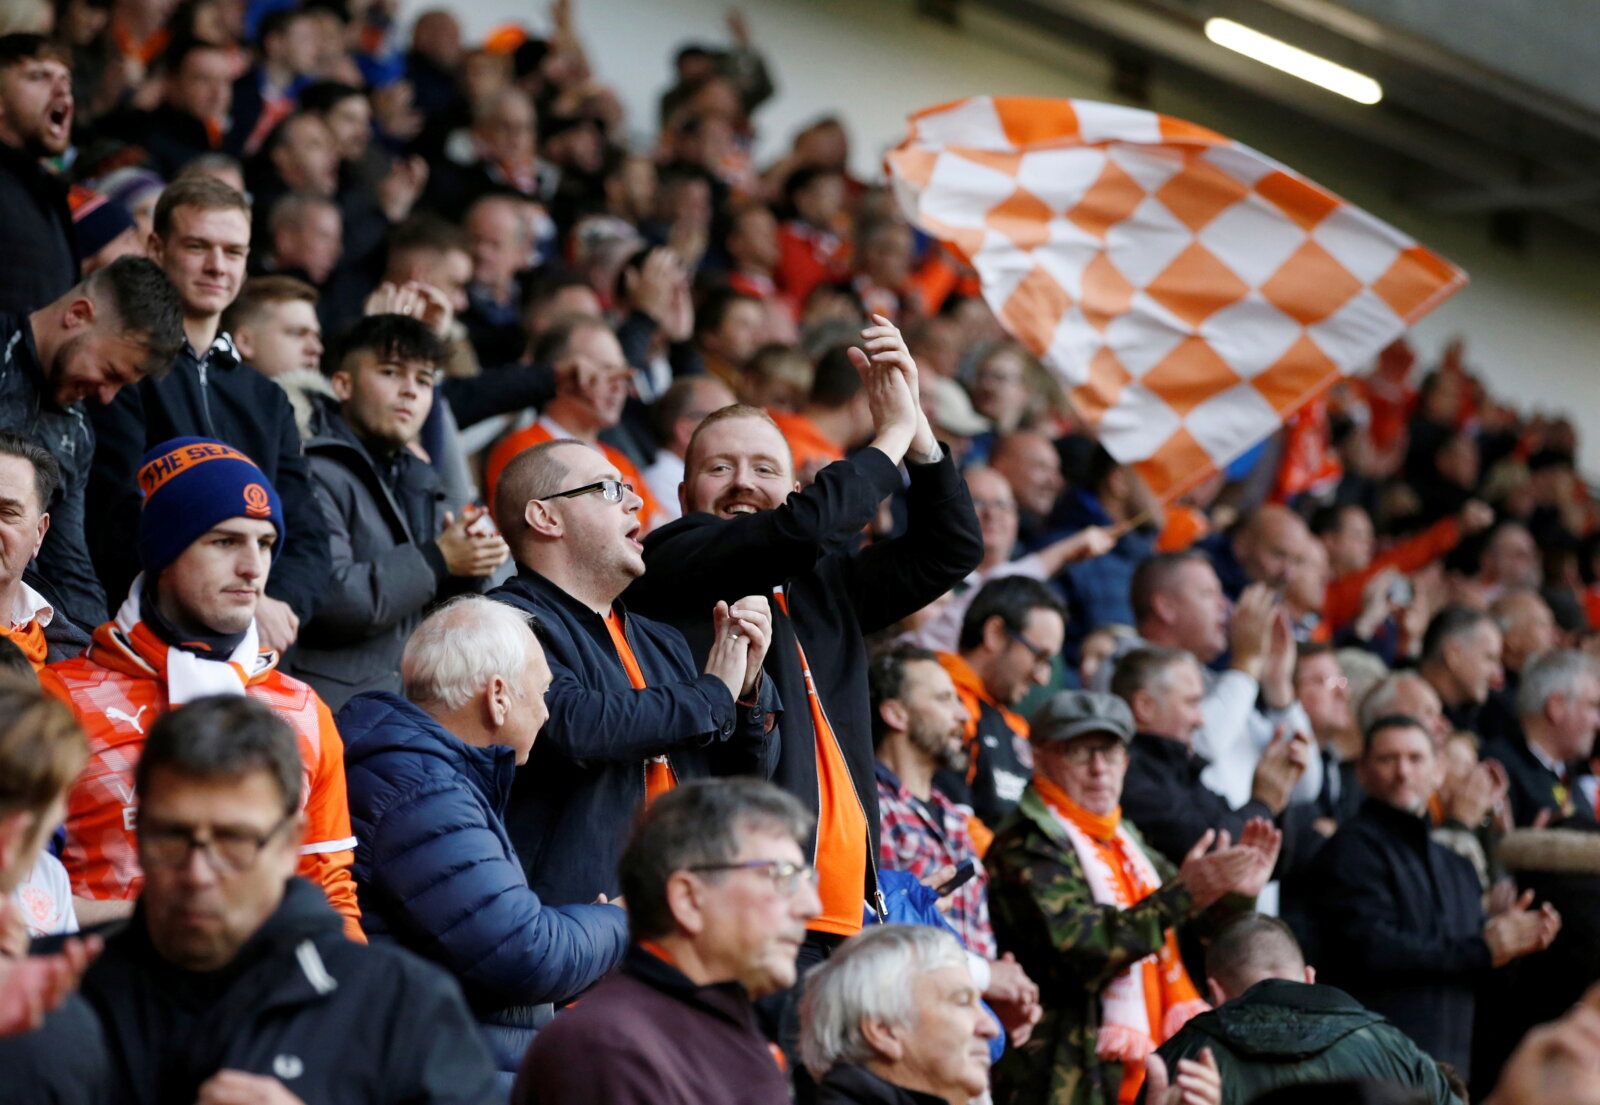 Soccer Football - Championship - Blackpool v Preston North End - Bloomfield Road, Blackpool, Britain - October 23, 2021 Blackpool fans celebrate after the match Action Images/Ed Sykes  EDITORIAL USE ONLY. No use with unauthorized audio, video, data, fixture lists, club/league logos or 